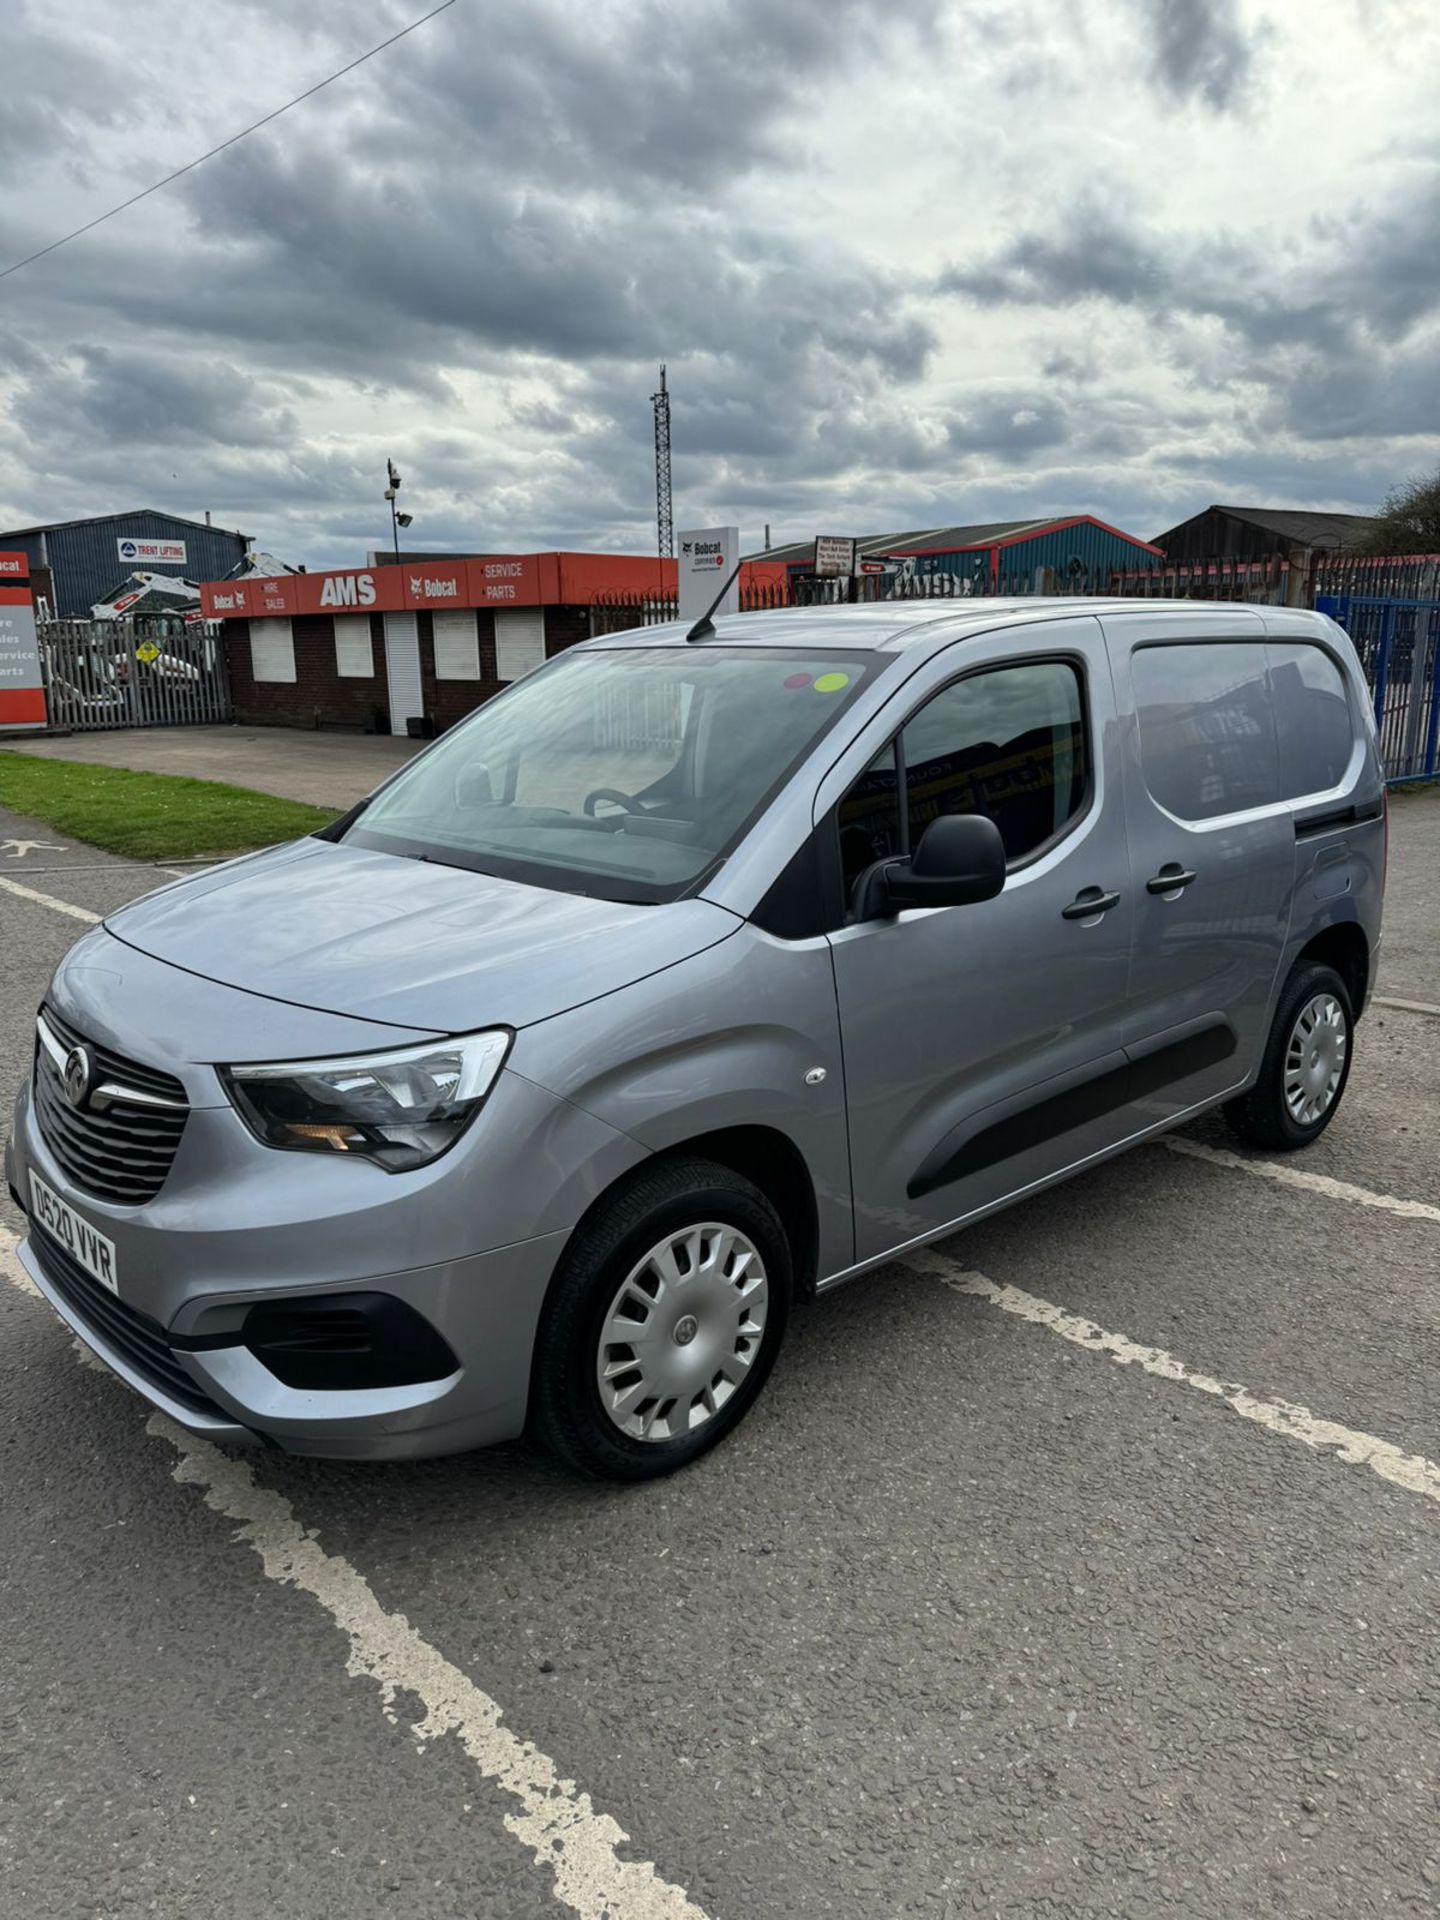 2020 20 VAUXHALL COMBO SPORTIVE PANEL VAN - 51K MILES - PLY LINED - AIR CON. - Image 3 of 11